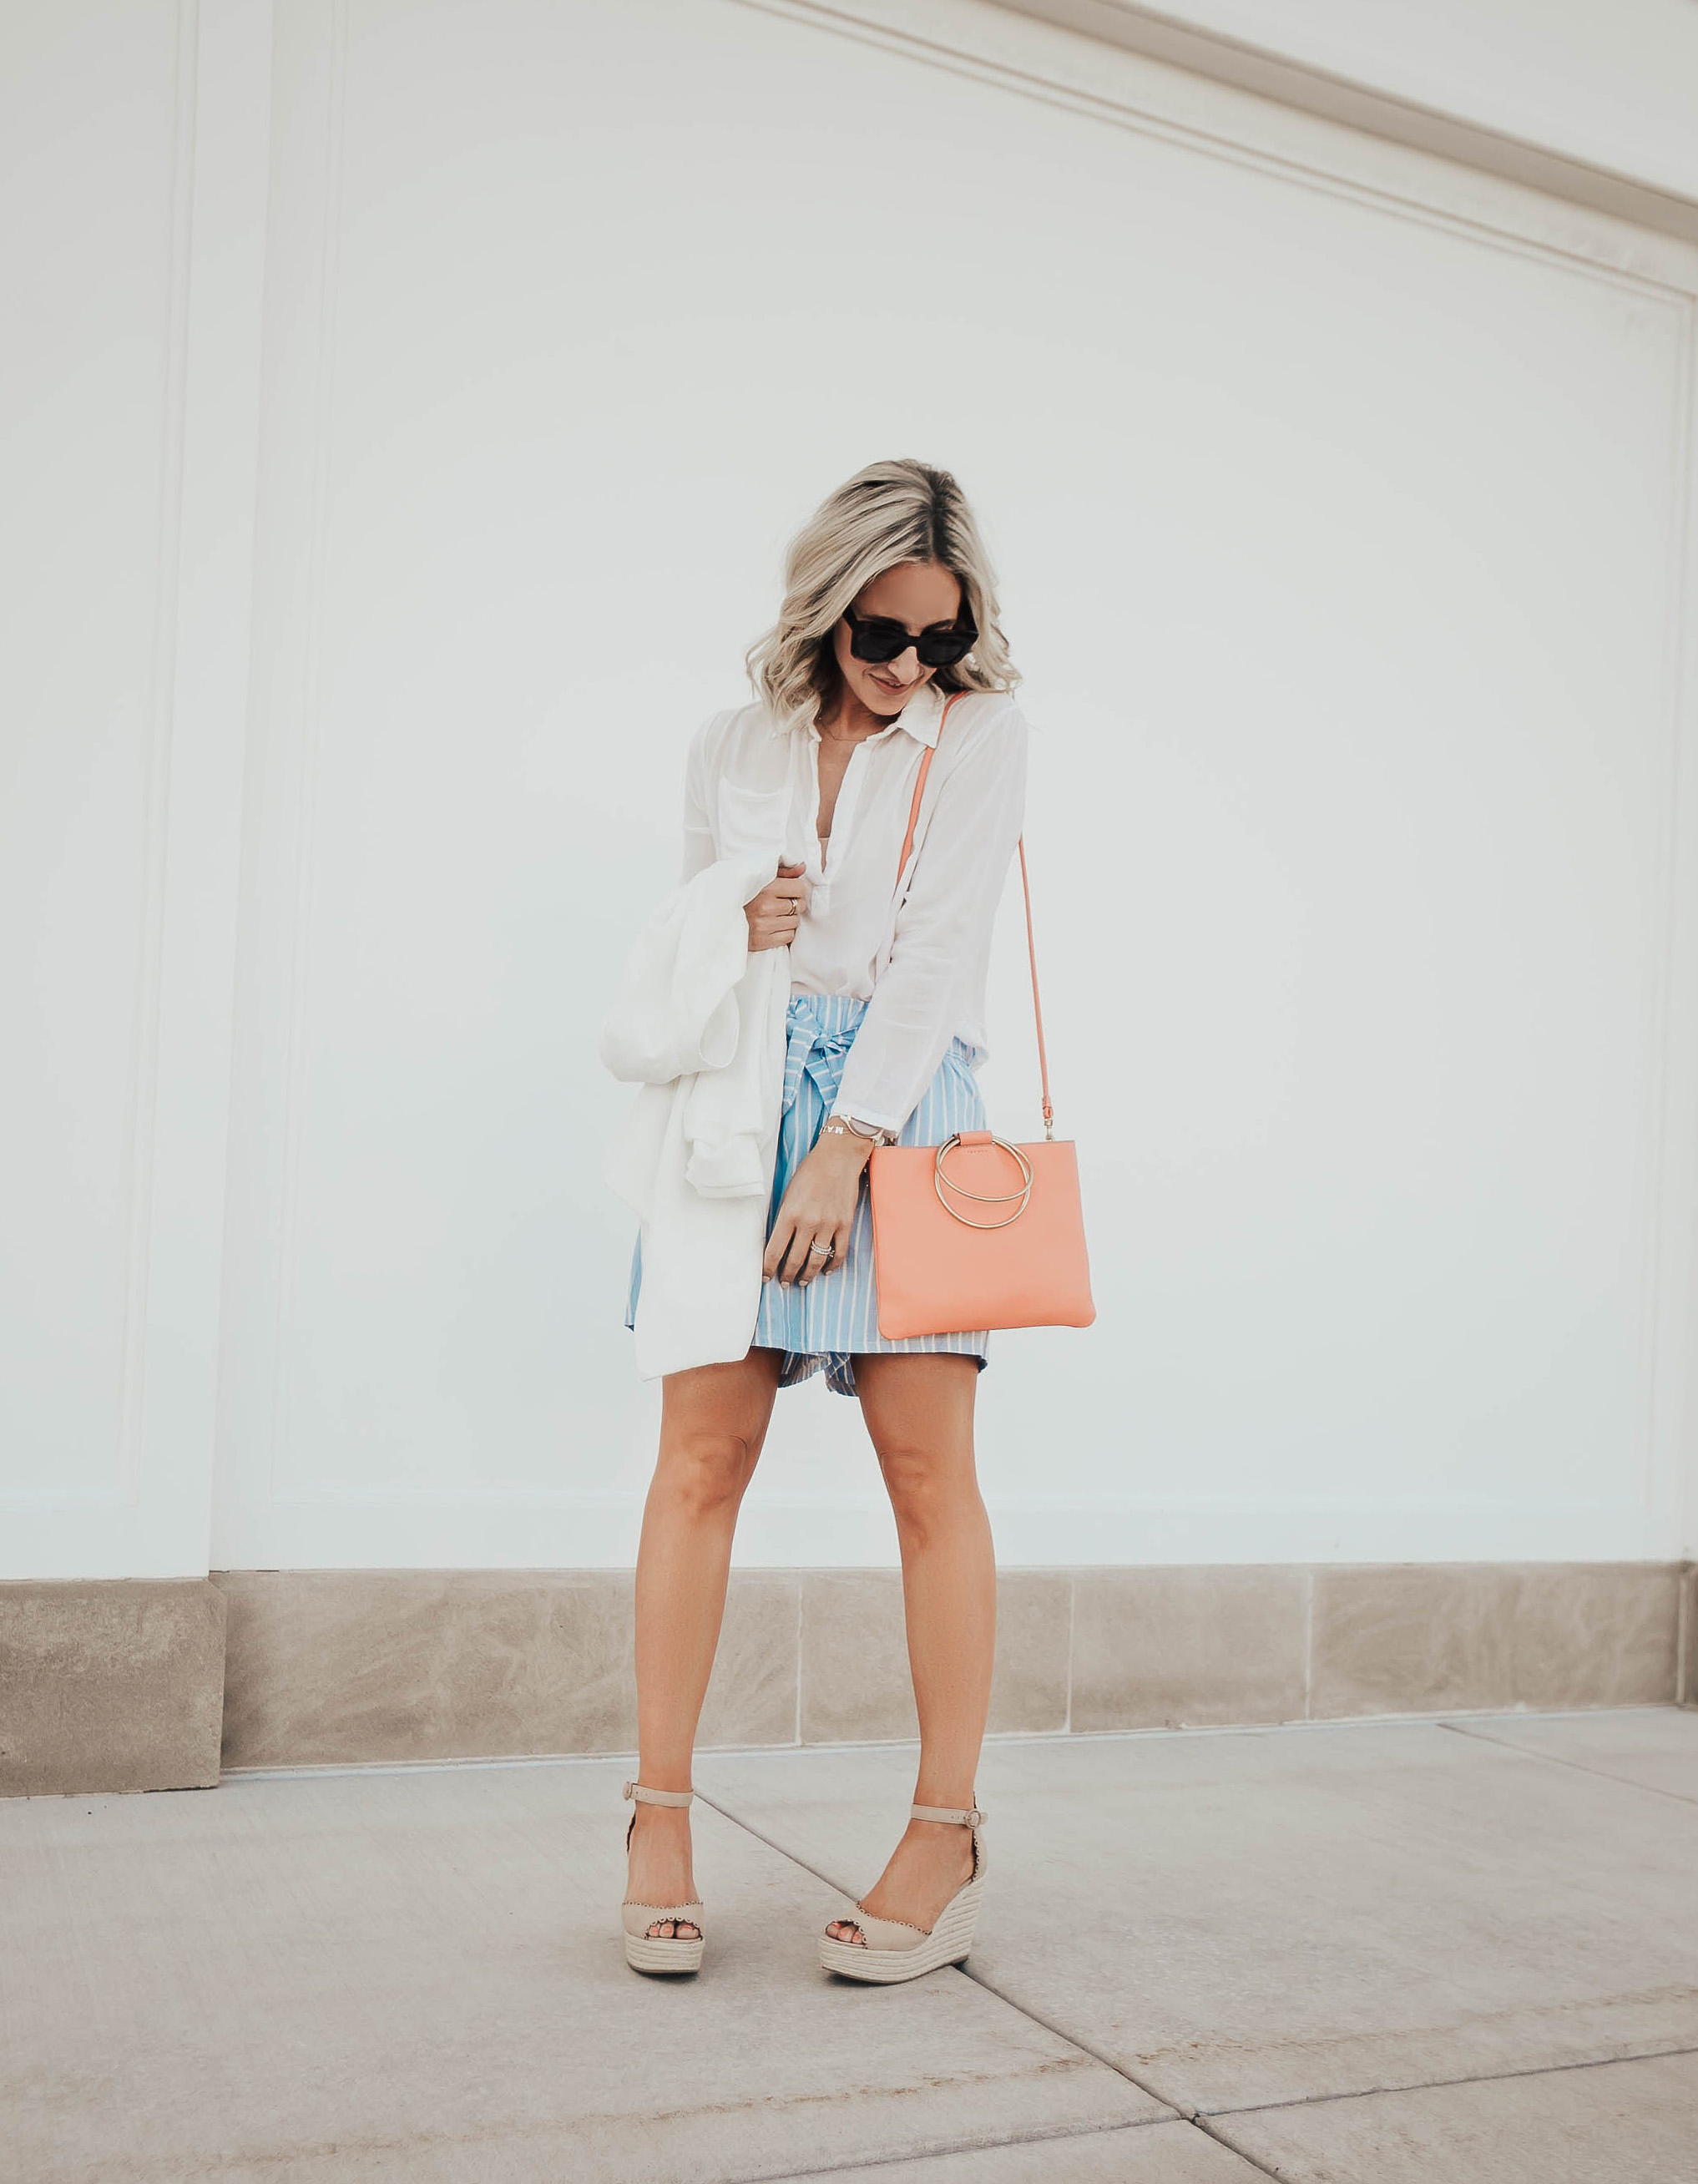 Reno Nevada Blogger, Emily Farren Wieczorek of Two Peas in a Prada shares her new addition to her handbag collection - a coral stunner from Thacker via Zappos